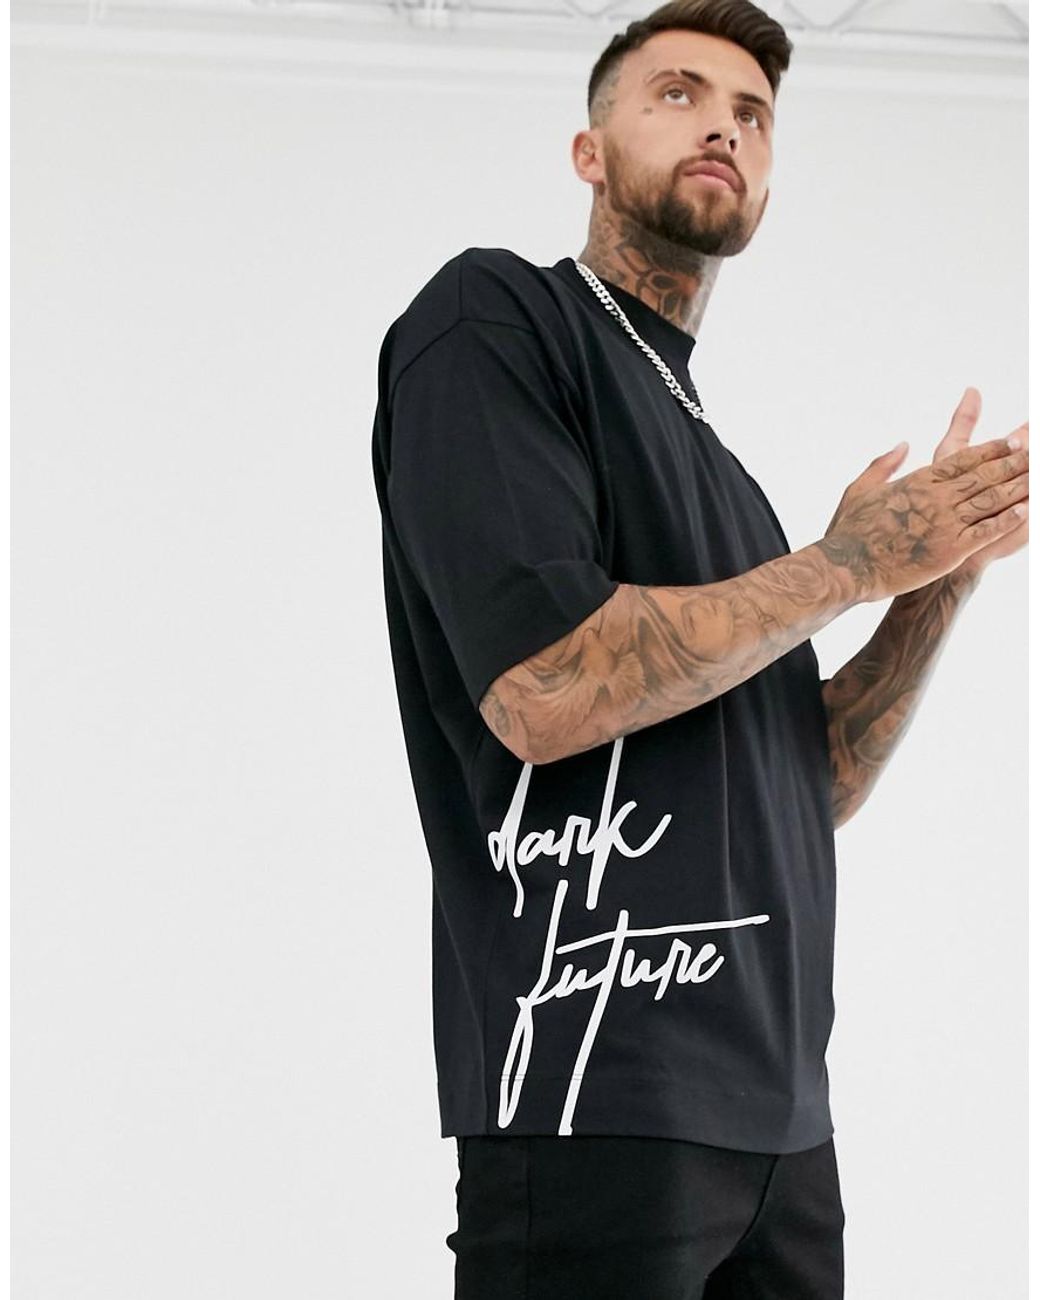 ASOS Dark Future oversized T-shirt with 3D embossed logo in gray